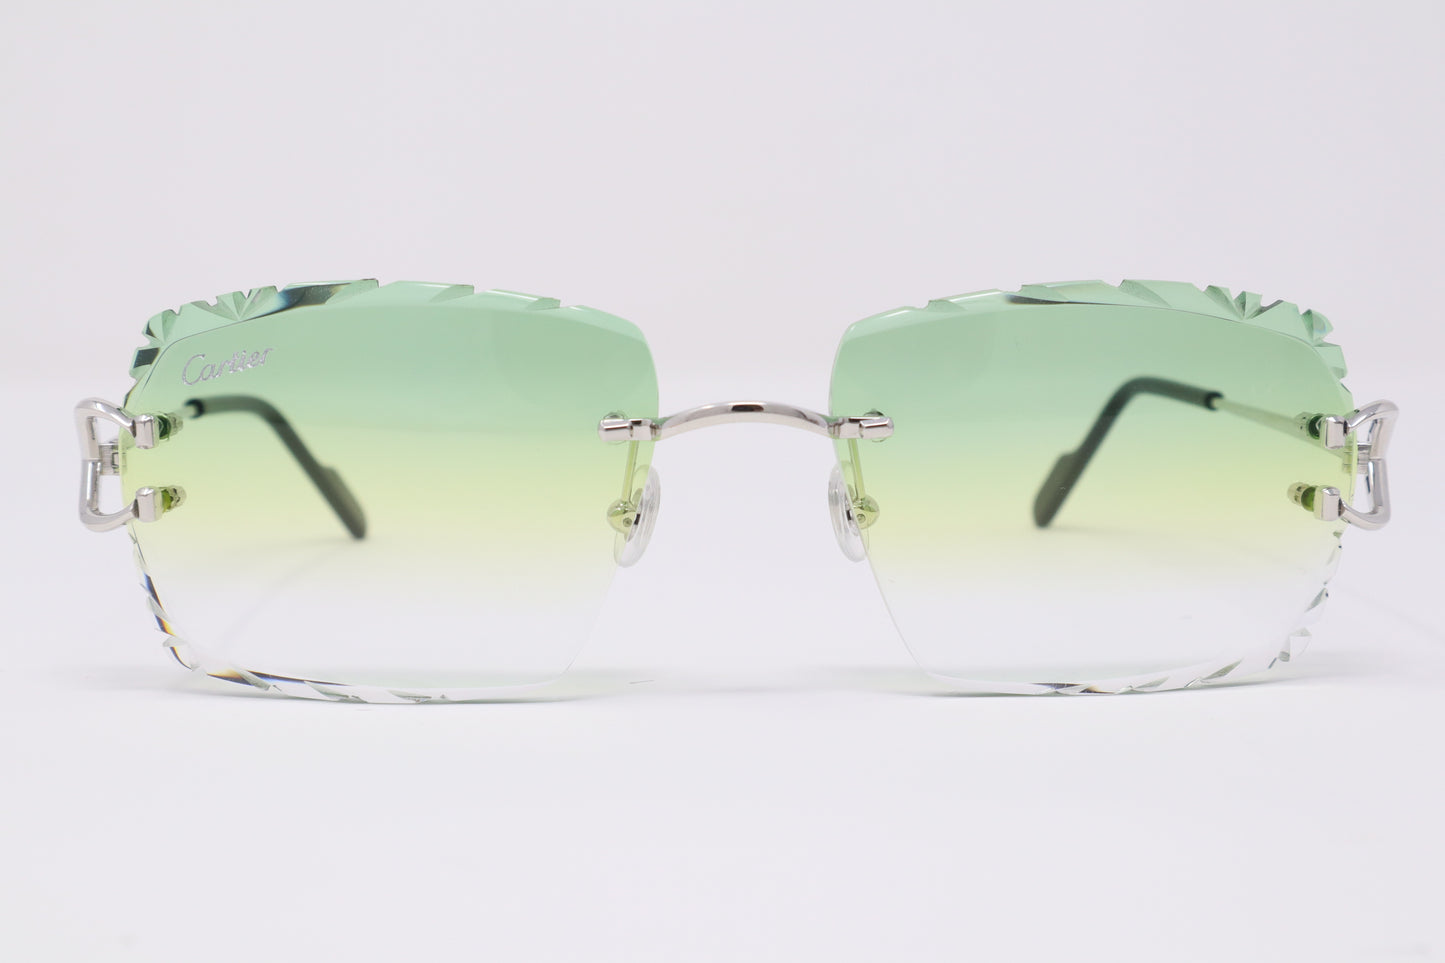 Cartier New Big C with Platinum Finish, Green to Yellow Gradient Lens - Diamond Cut